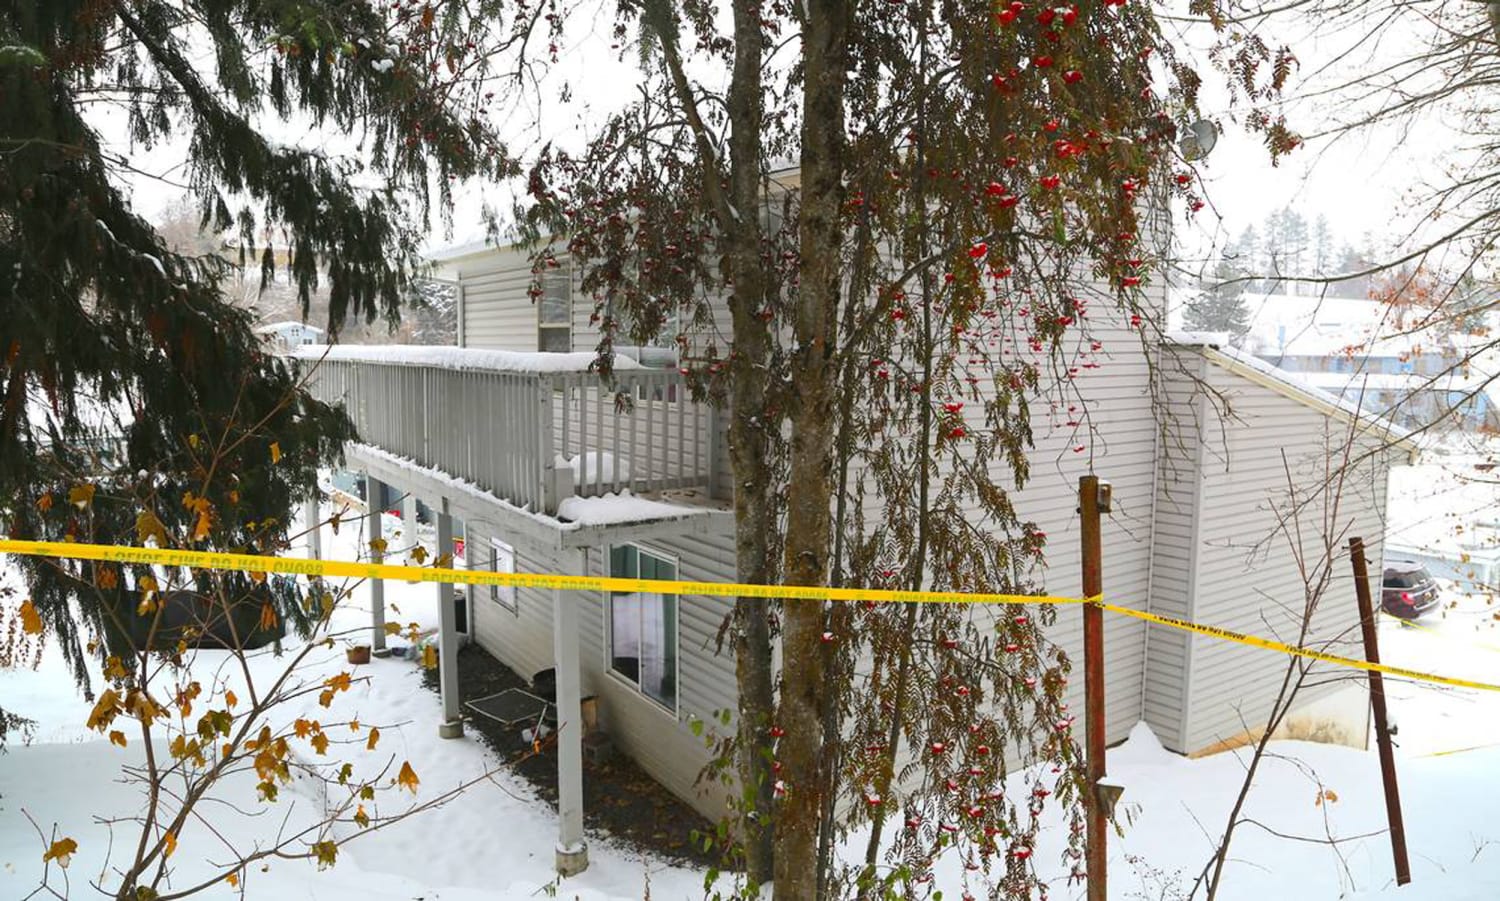 Idaho murders: Inside the off-campus house where 4 students were